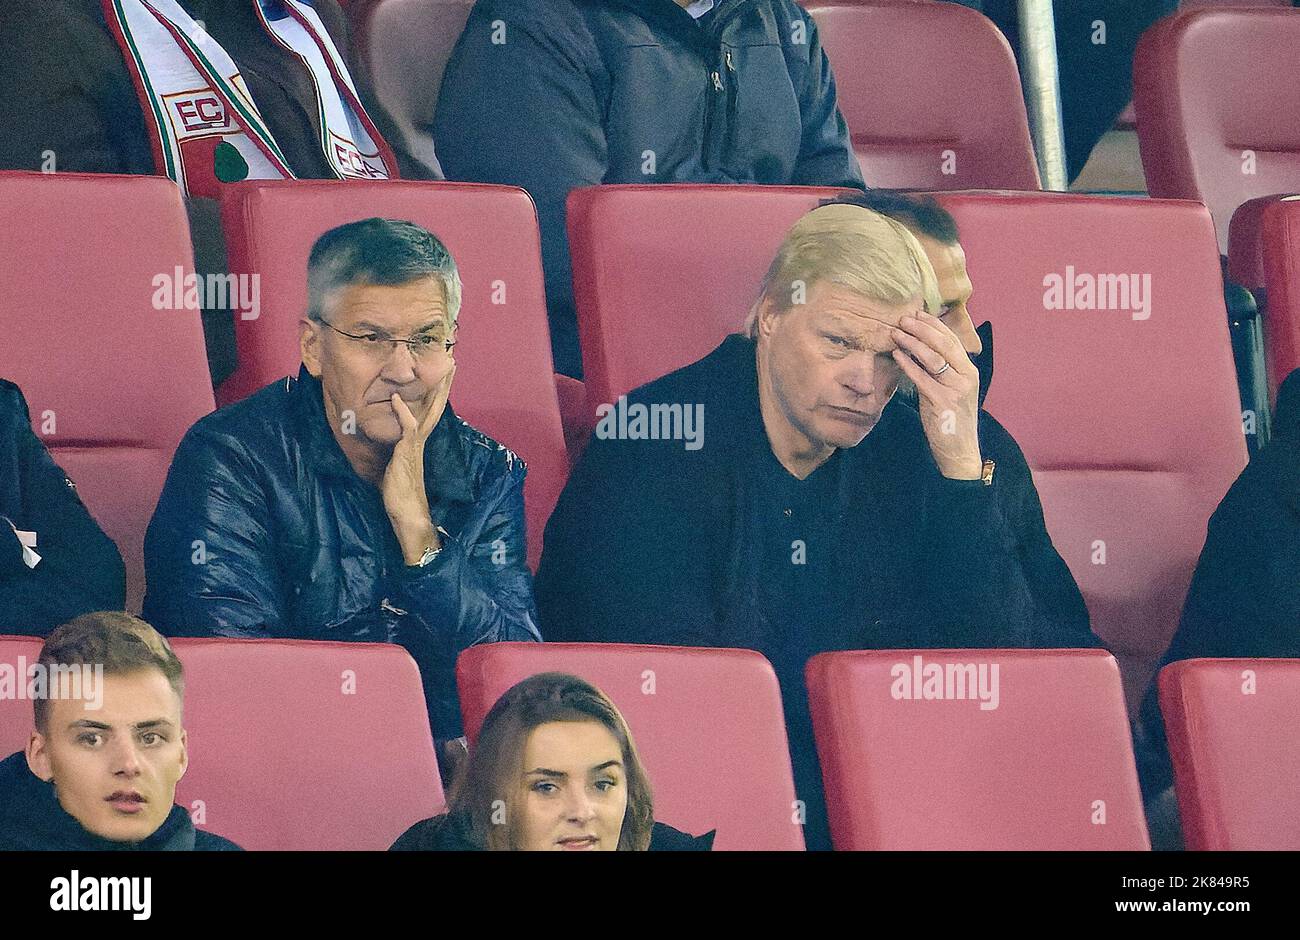 Herbert HAINER, FCB president and Ex CEO Adidas Oliver KAHN, FCB CEO, Vorstandsvorsitzender der FC Bayern München AG,  in the match DFB Cup second round FC AUGSBURG -  FC BAYERN MUENCHEN 2-5 DFB-Pokal, German Football Trophy on Oct 19, 2022 in Augsburg, Germany. Season 2022/2023, 2.Runde,  © Peter Schatz / Alamy Live News   DFB regulations prohibit any use of photographs as image sequences and/or quasi-video. Credit: Peter Schatz/Alamy Live News Stock Photo